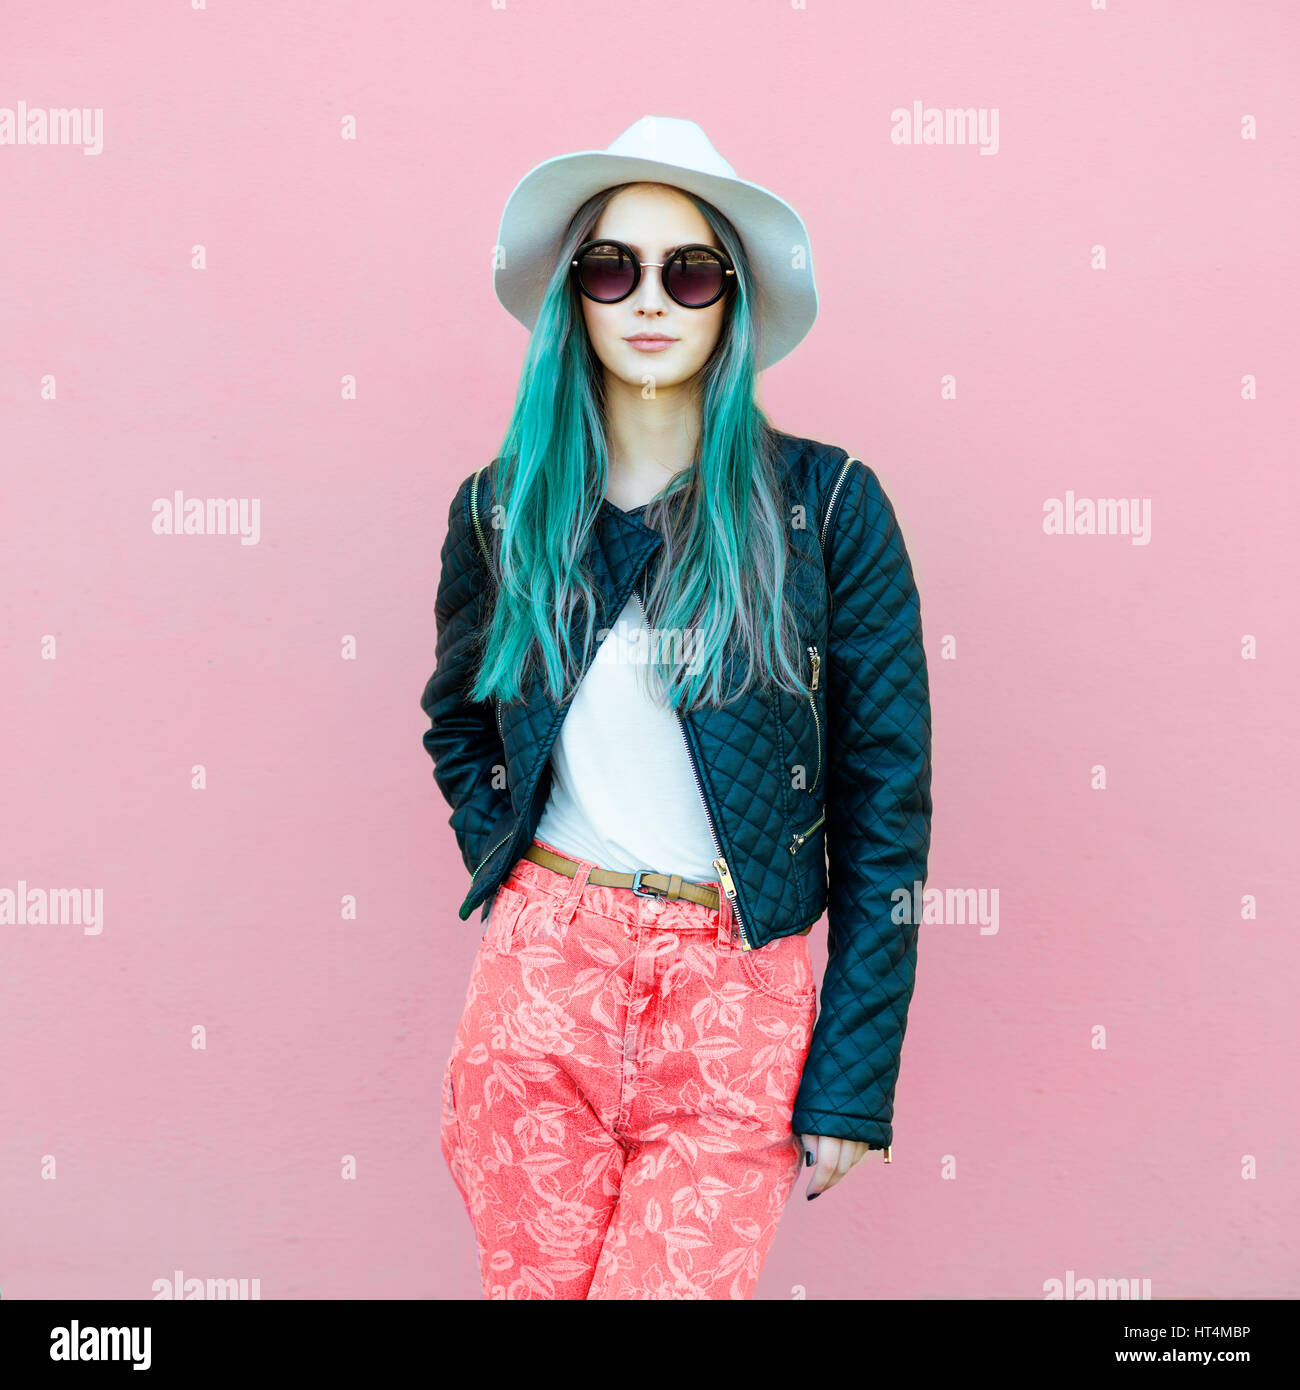 Fashionable young blogger woman with blue hair wearing casual style outfit with black jacket, white hat, pink jeans and sunglasses posing near the wal Stock Photo